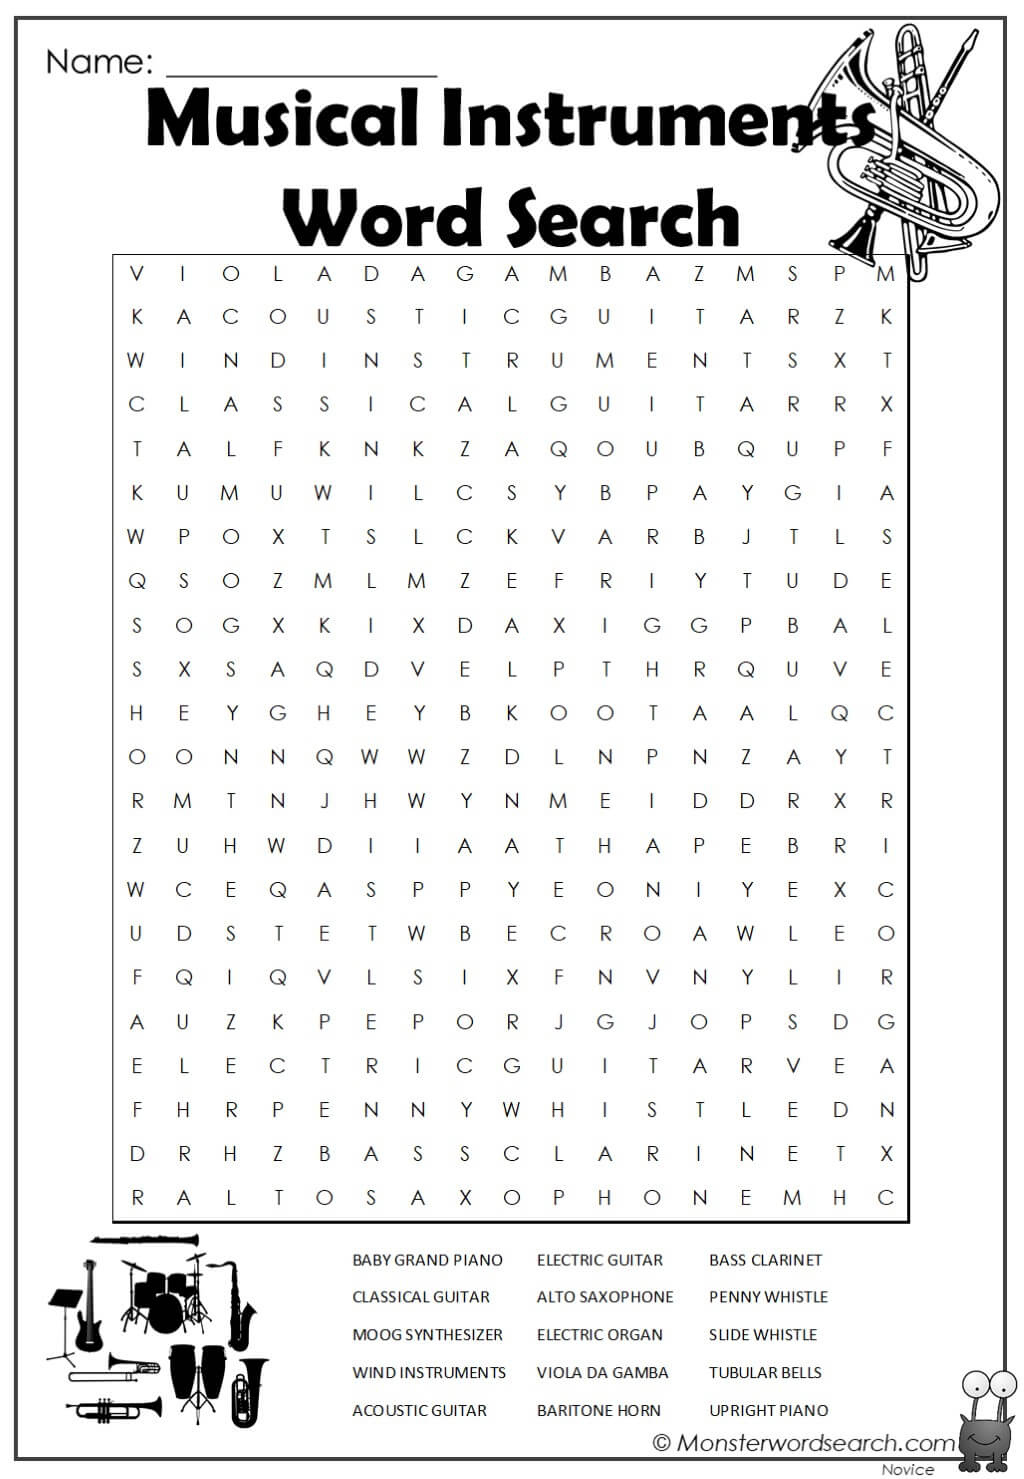 Musical Instruments Word Search 1 jpg Monster Word Search